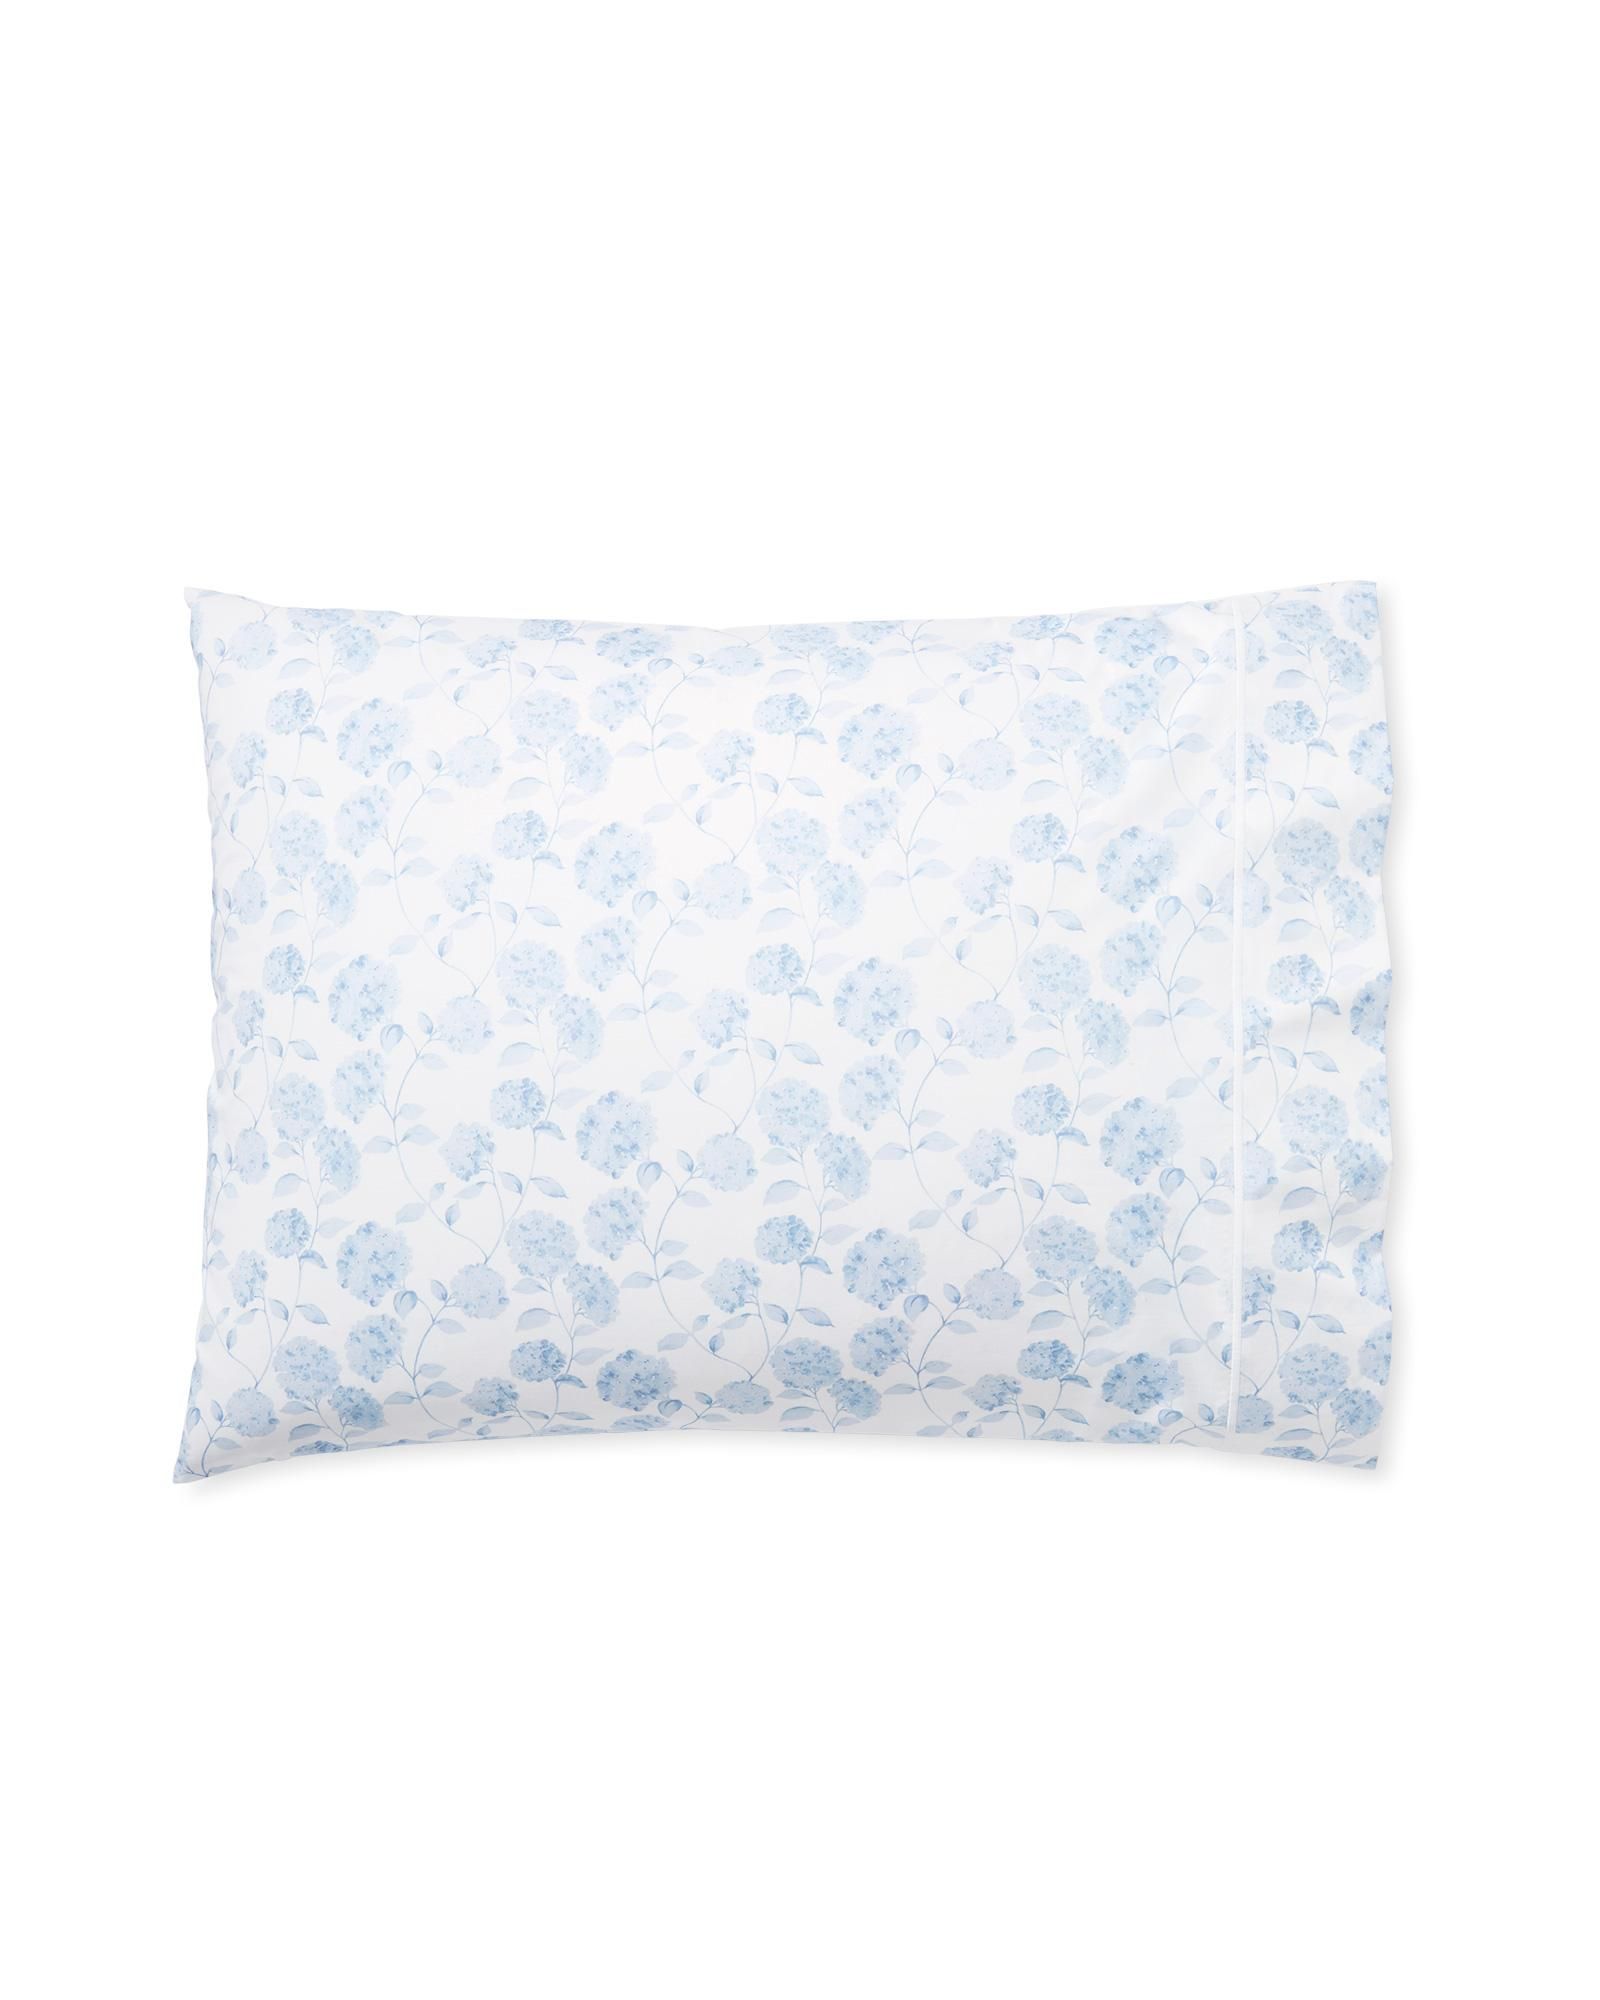 Hydrangea Percale Pillowcase Set (Set of 2) | Serena and Lily